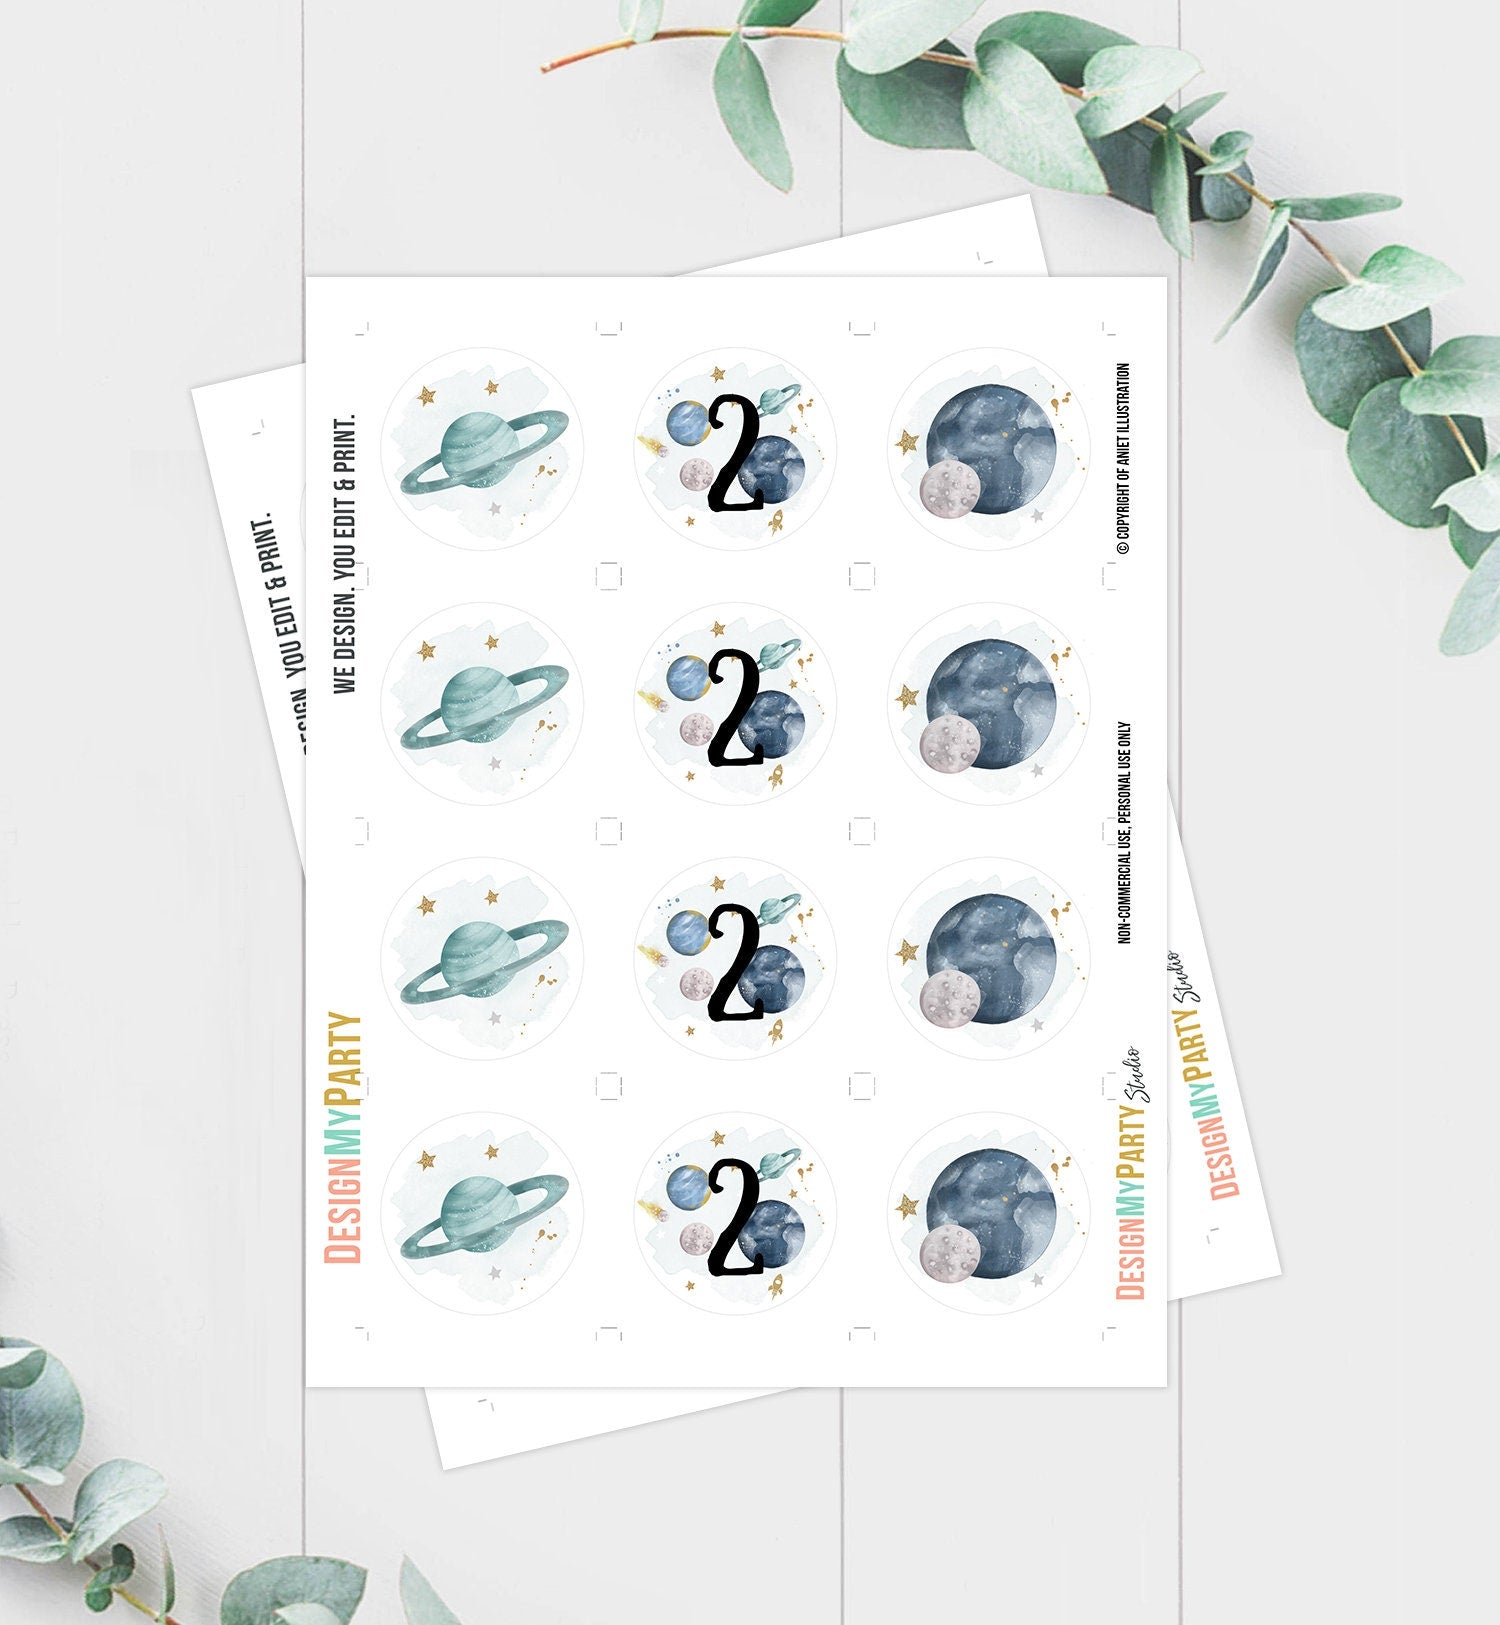 Outer Space Birthday Cupcake Toppers Second Trip Around the Sun Favor Tags Space Second Birthday Two Planets Galaxy Download PRINTABLE 0357